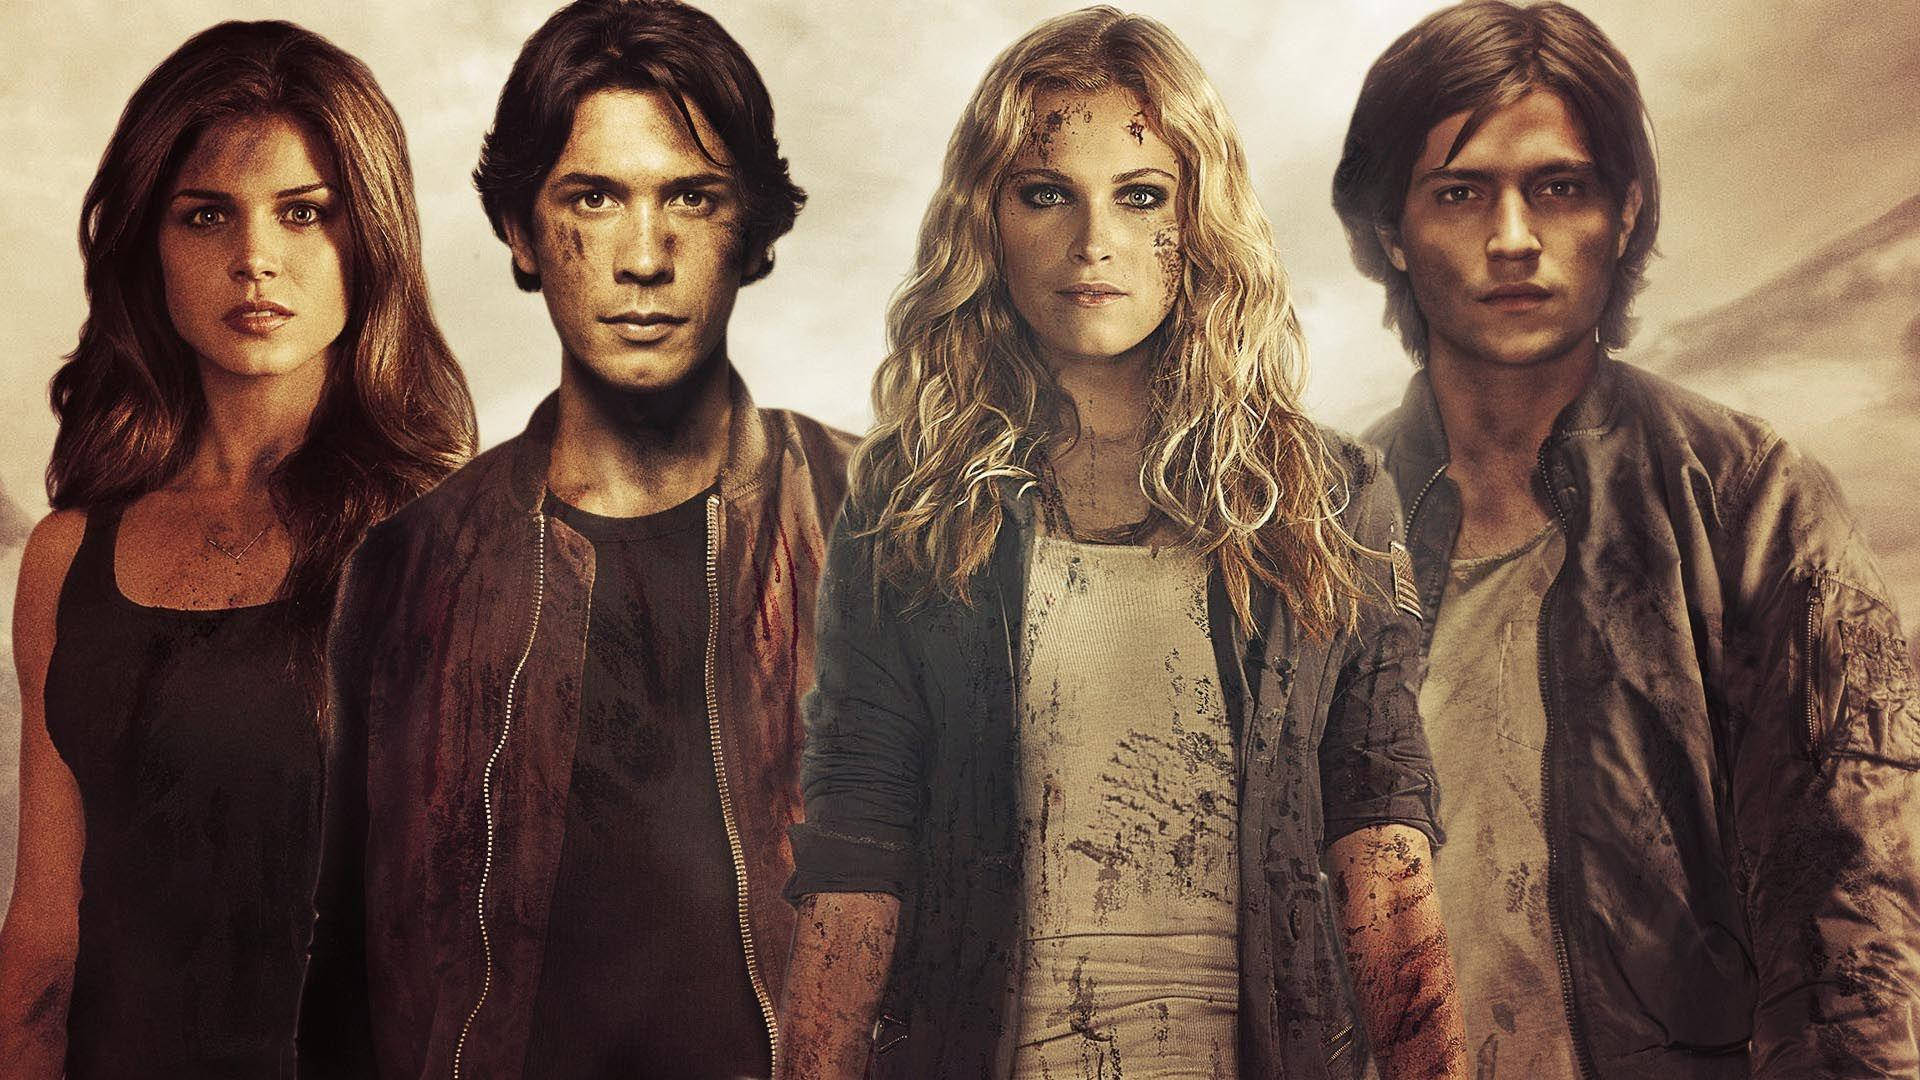 The Resilient Characters of The 100 - Madi Griffin amidst the Cast Wallpaper